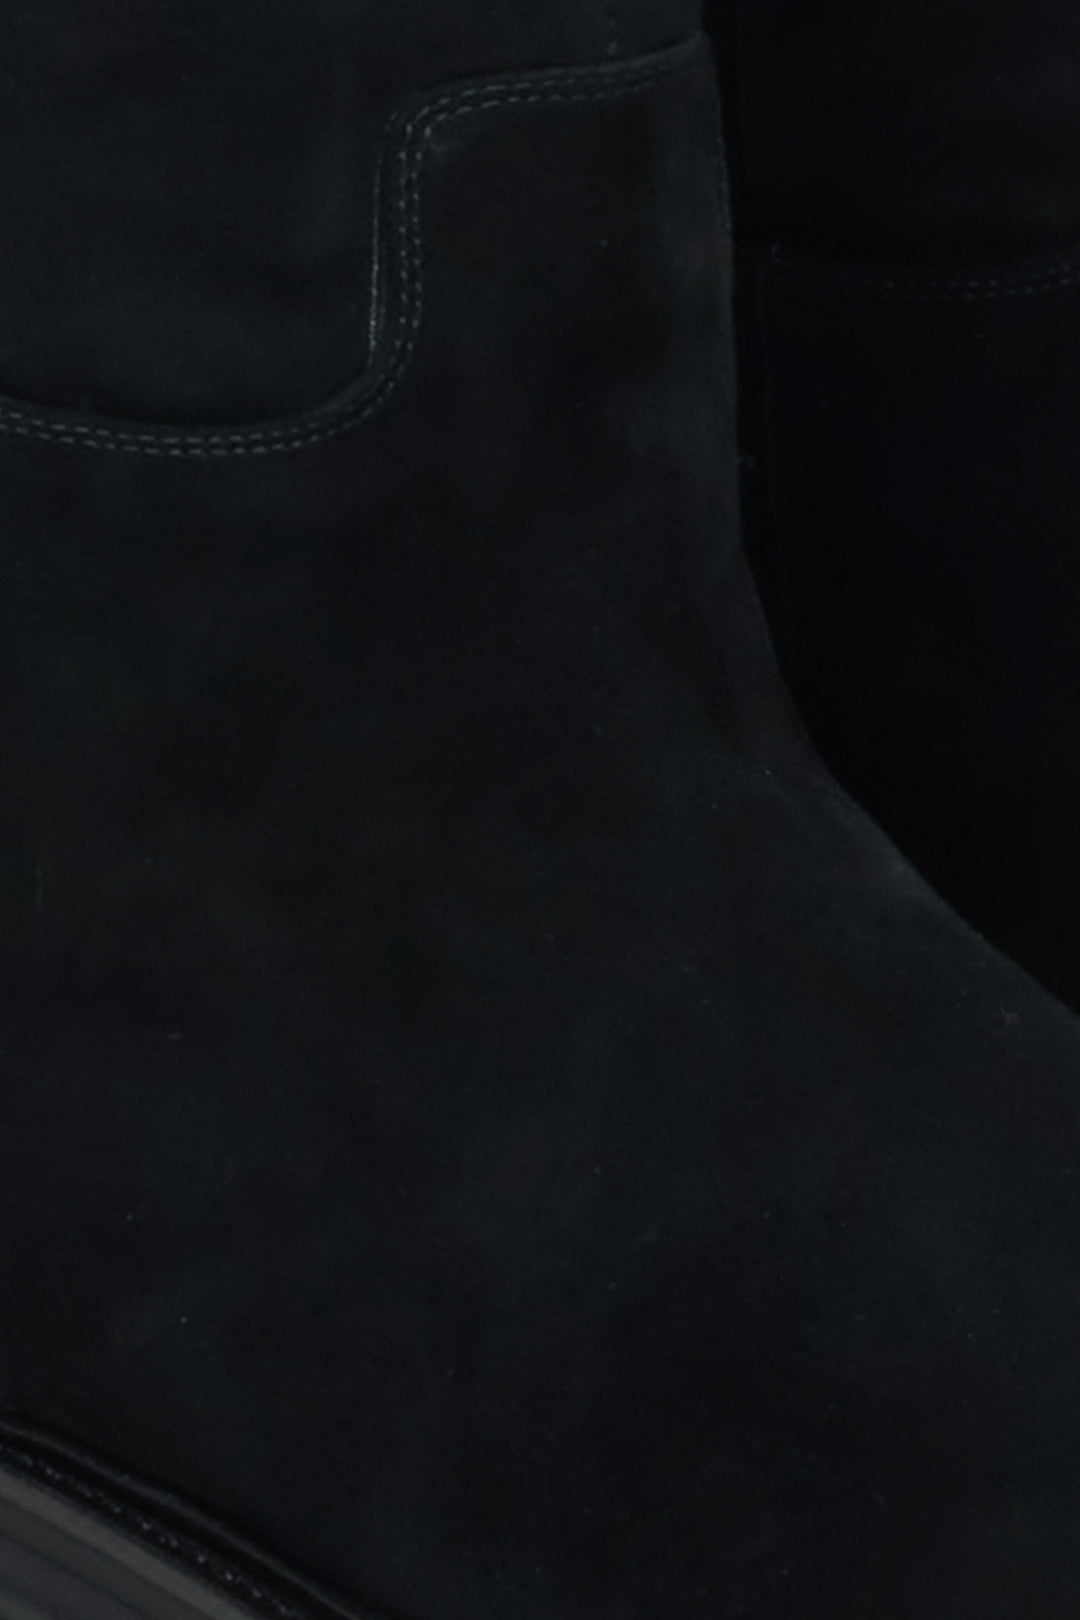 Velour knee-high boots for winter in black - a close-up on details.